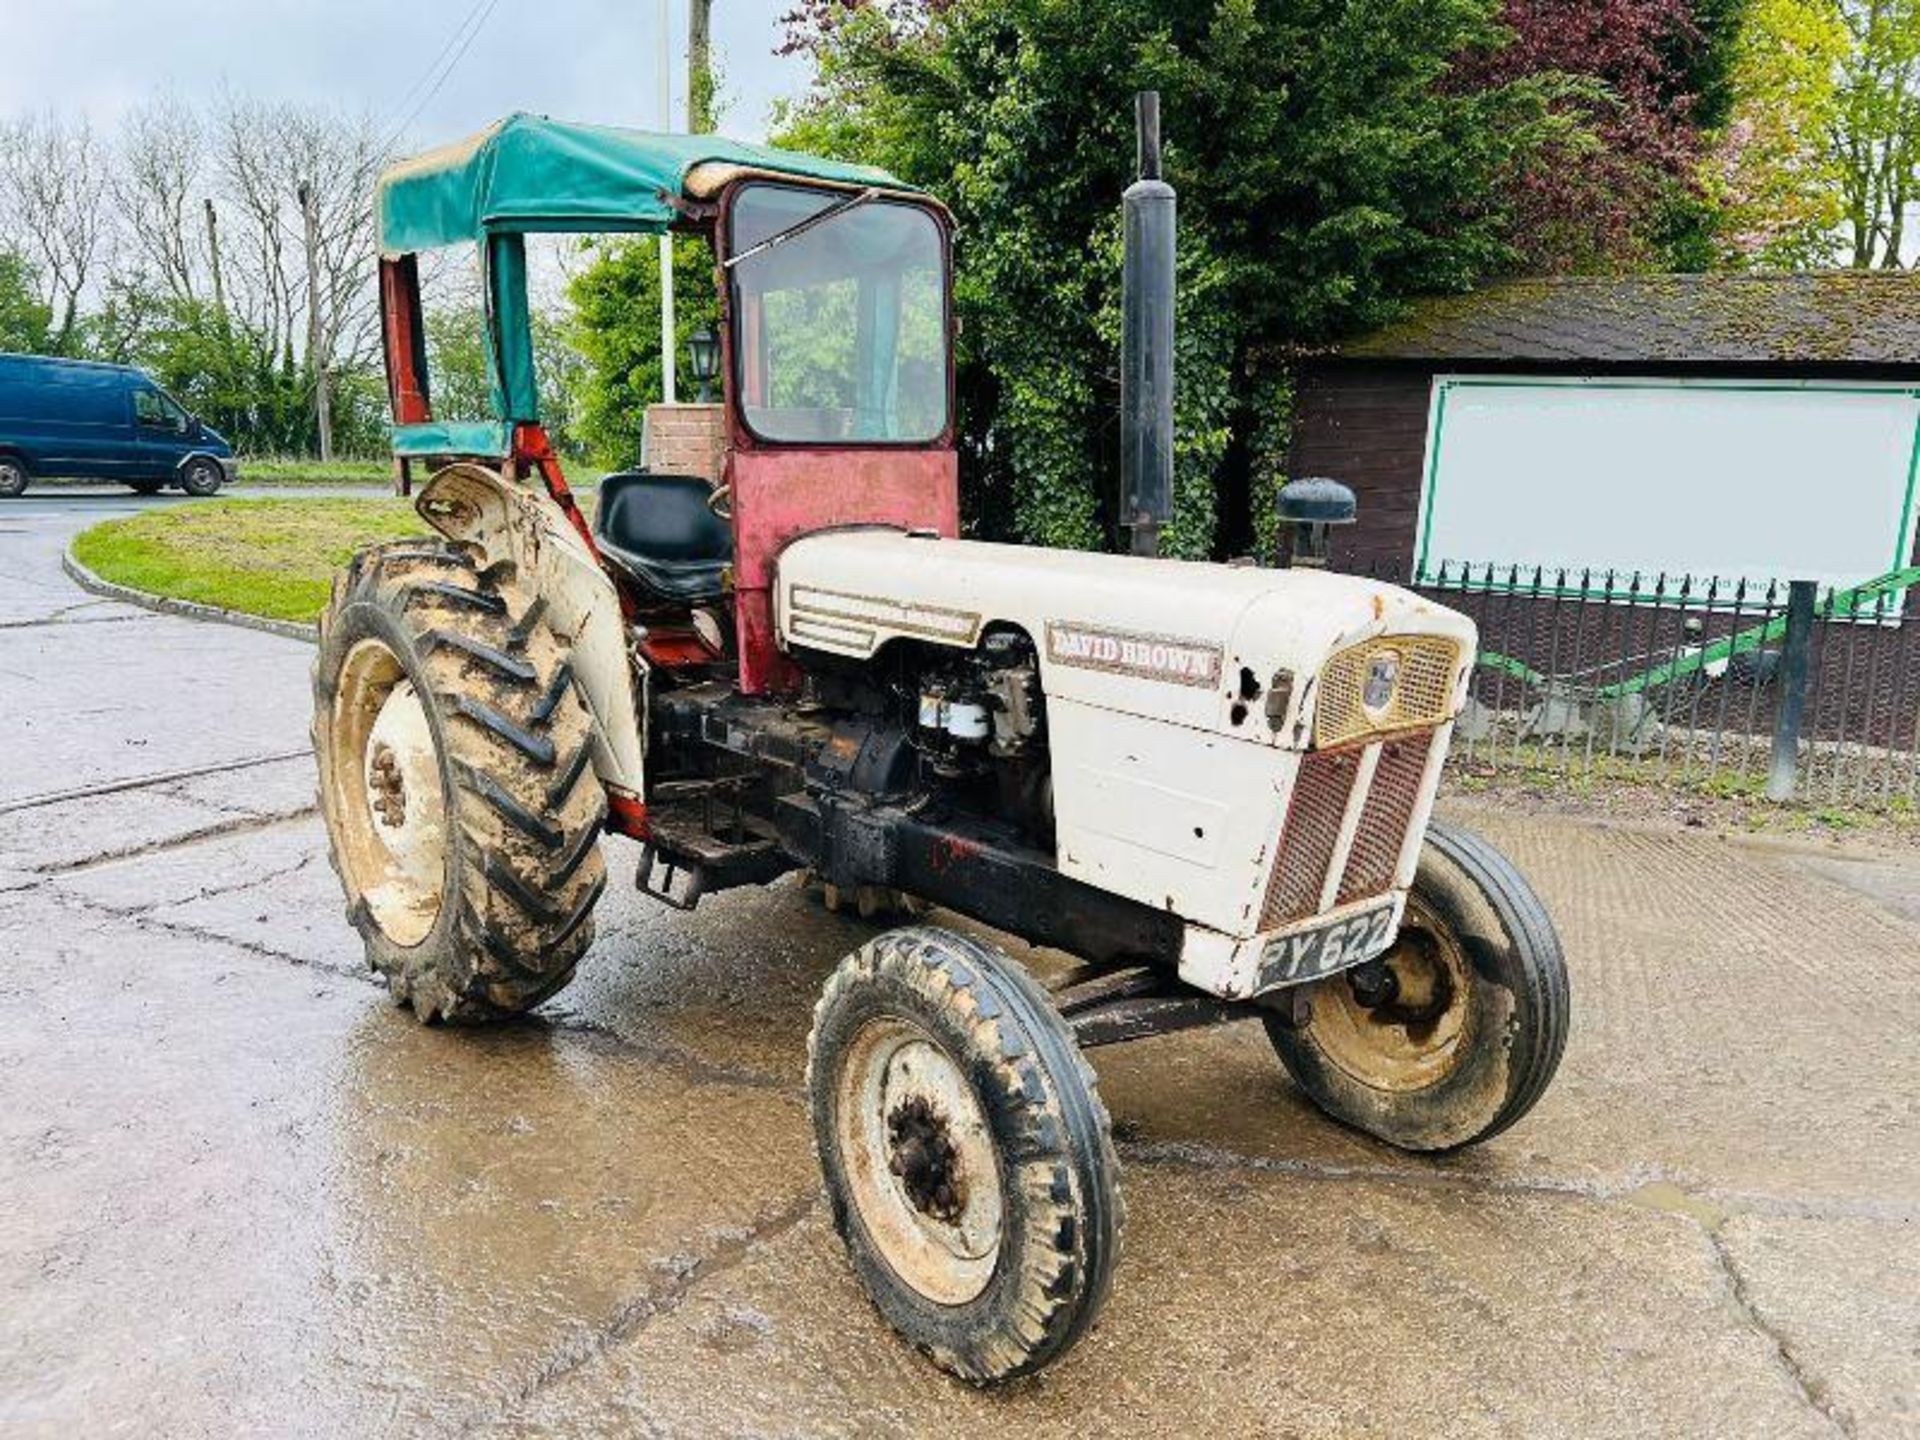 DAVID BROWN 780 TRACTOR *ONE OWNER FROM NEW* C/W ORIGINAL HANDBOOK FROM NEW - Image 12 of 13